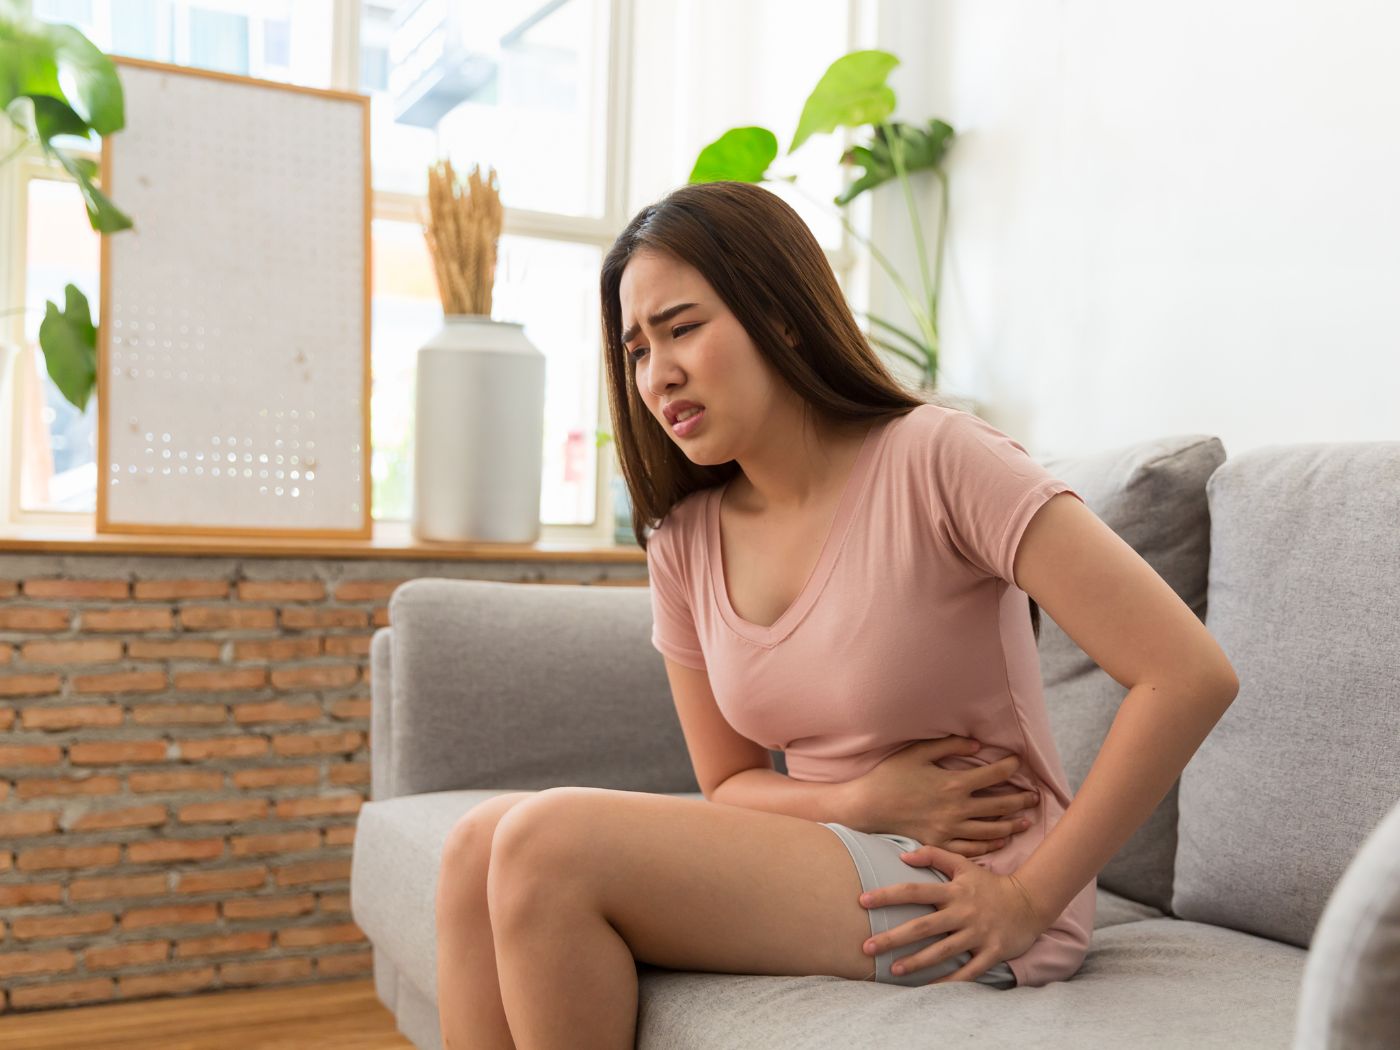 Symptoms, Causes, and Effective Ways to Ease Out Period Cramps